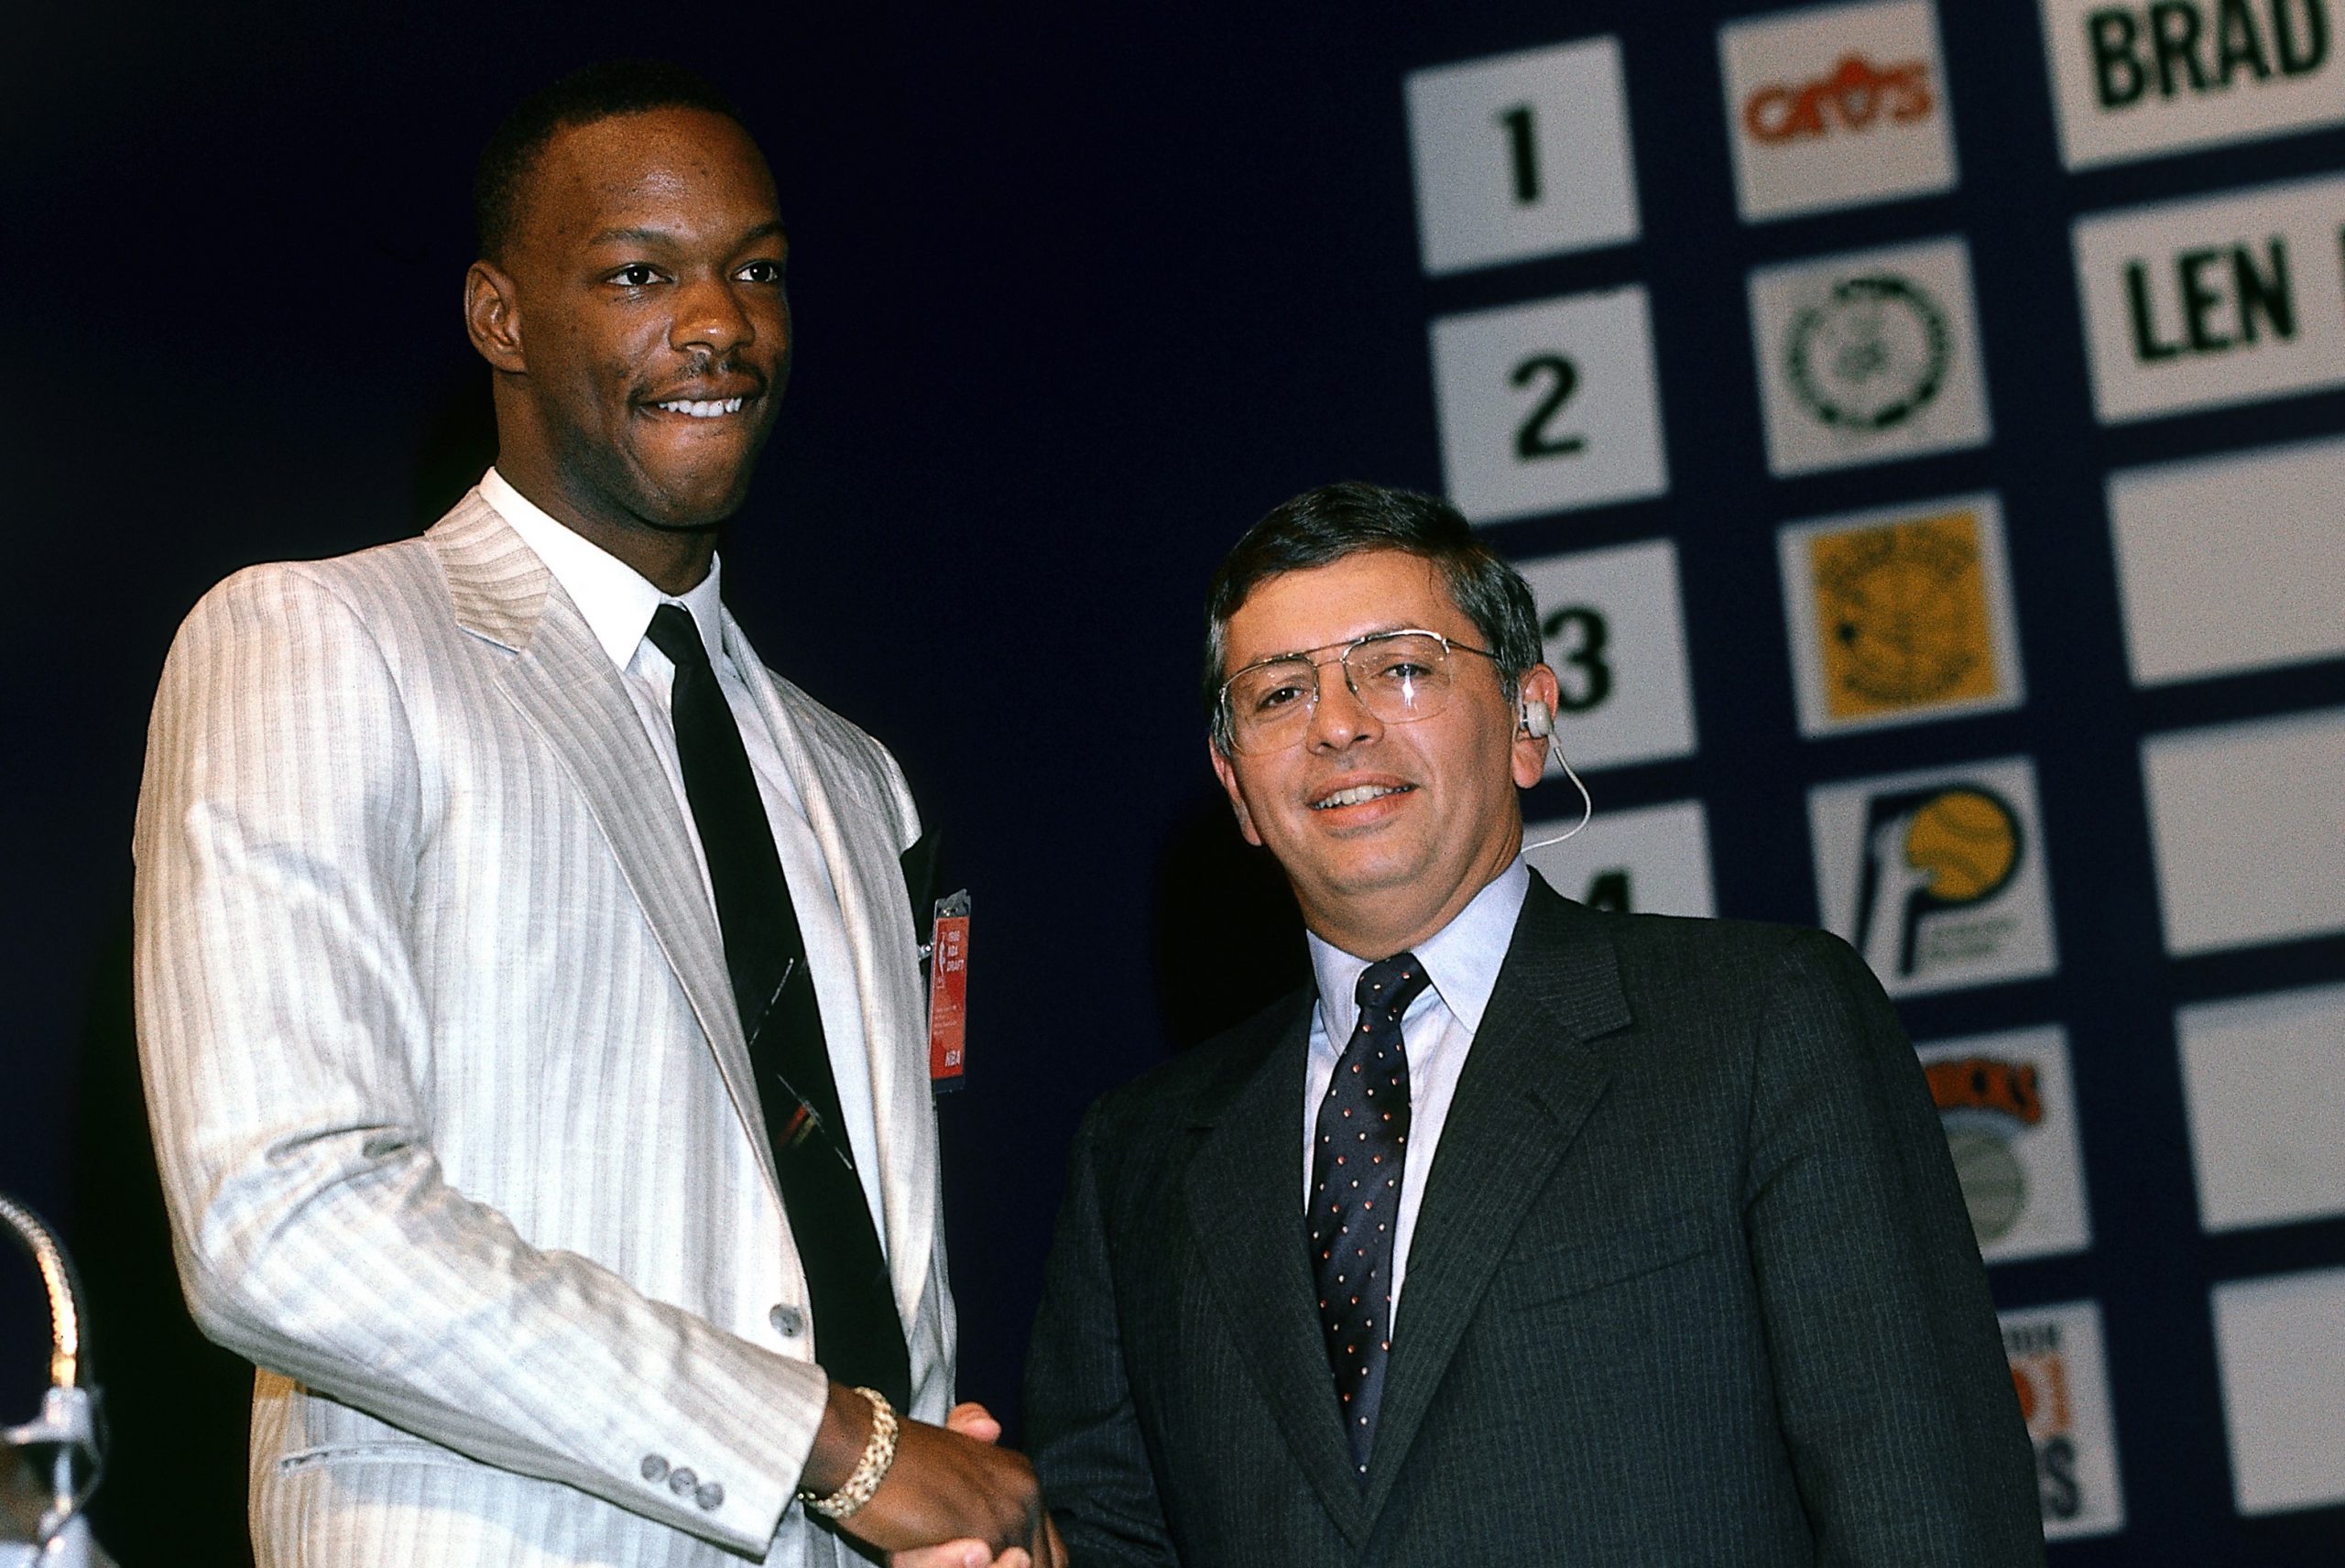 Len Bias shakes hands with David Stern